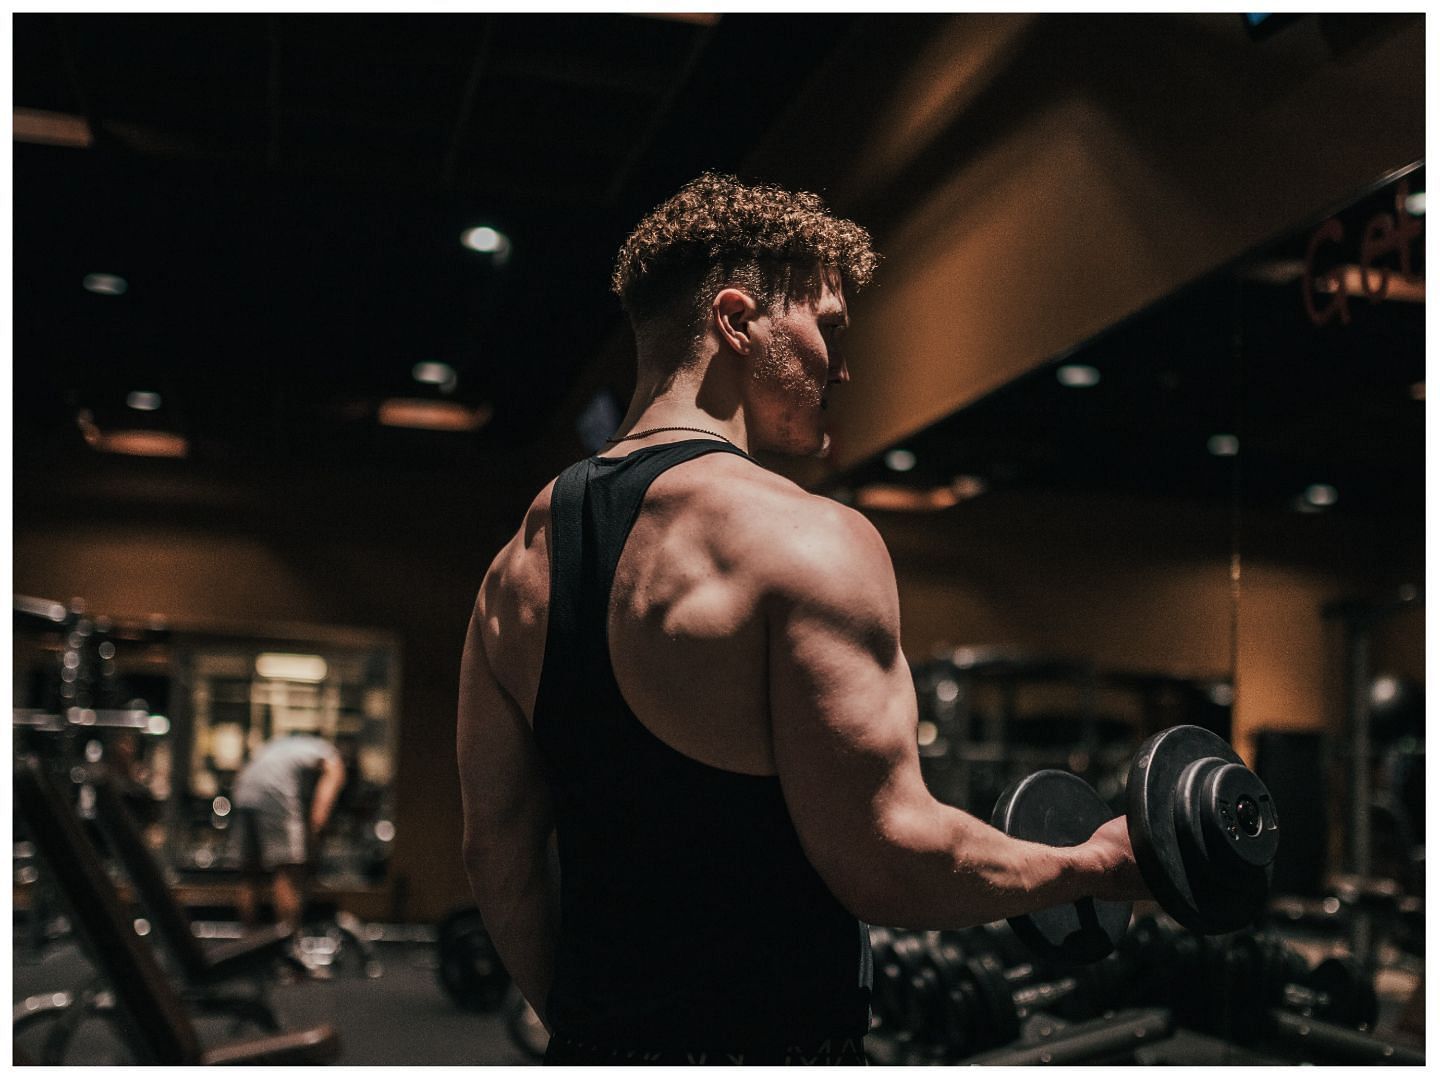 Want to build strong and muscular arms? Try these five effective bicep exercises. (Image via Unsplash /Luke Witter)